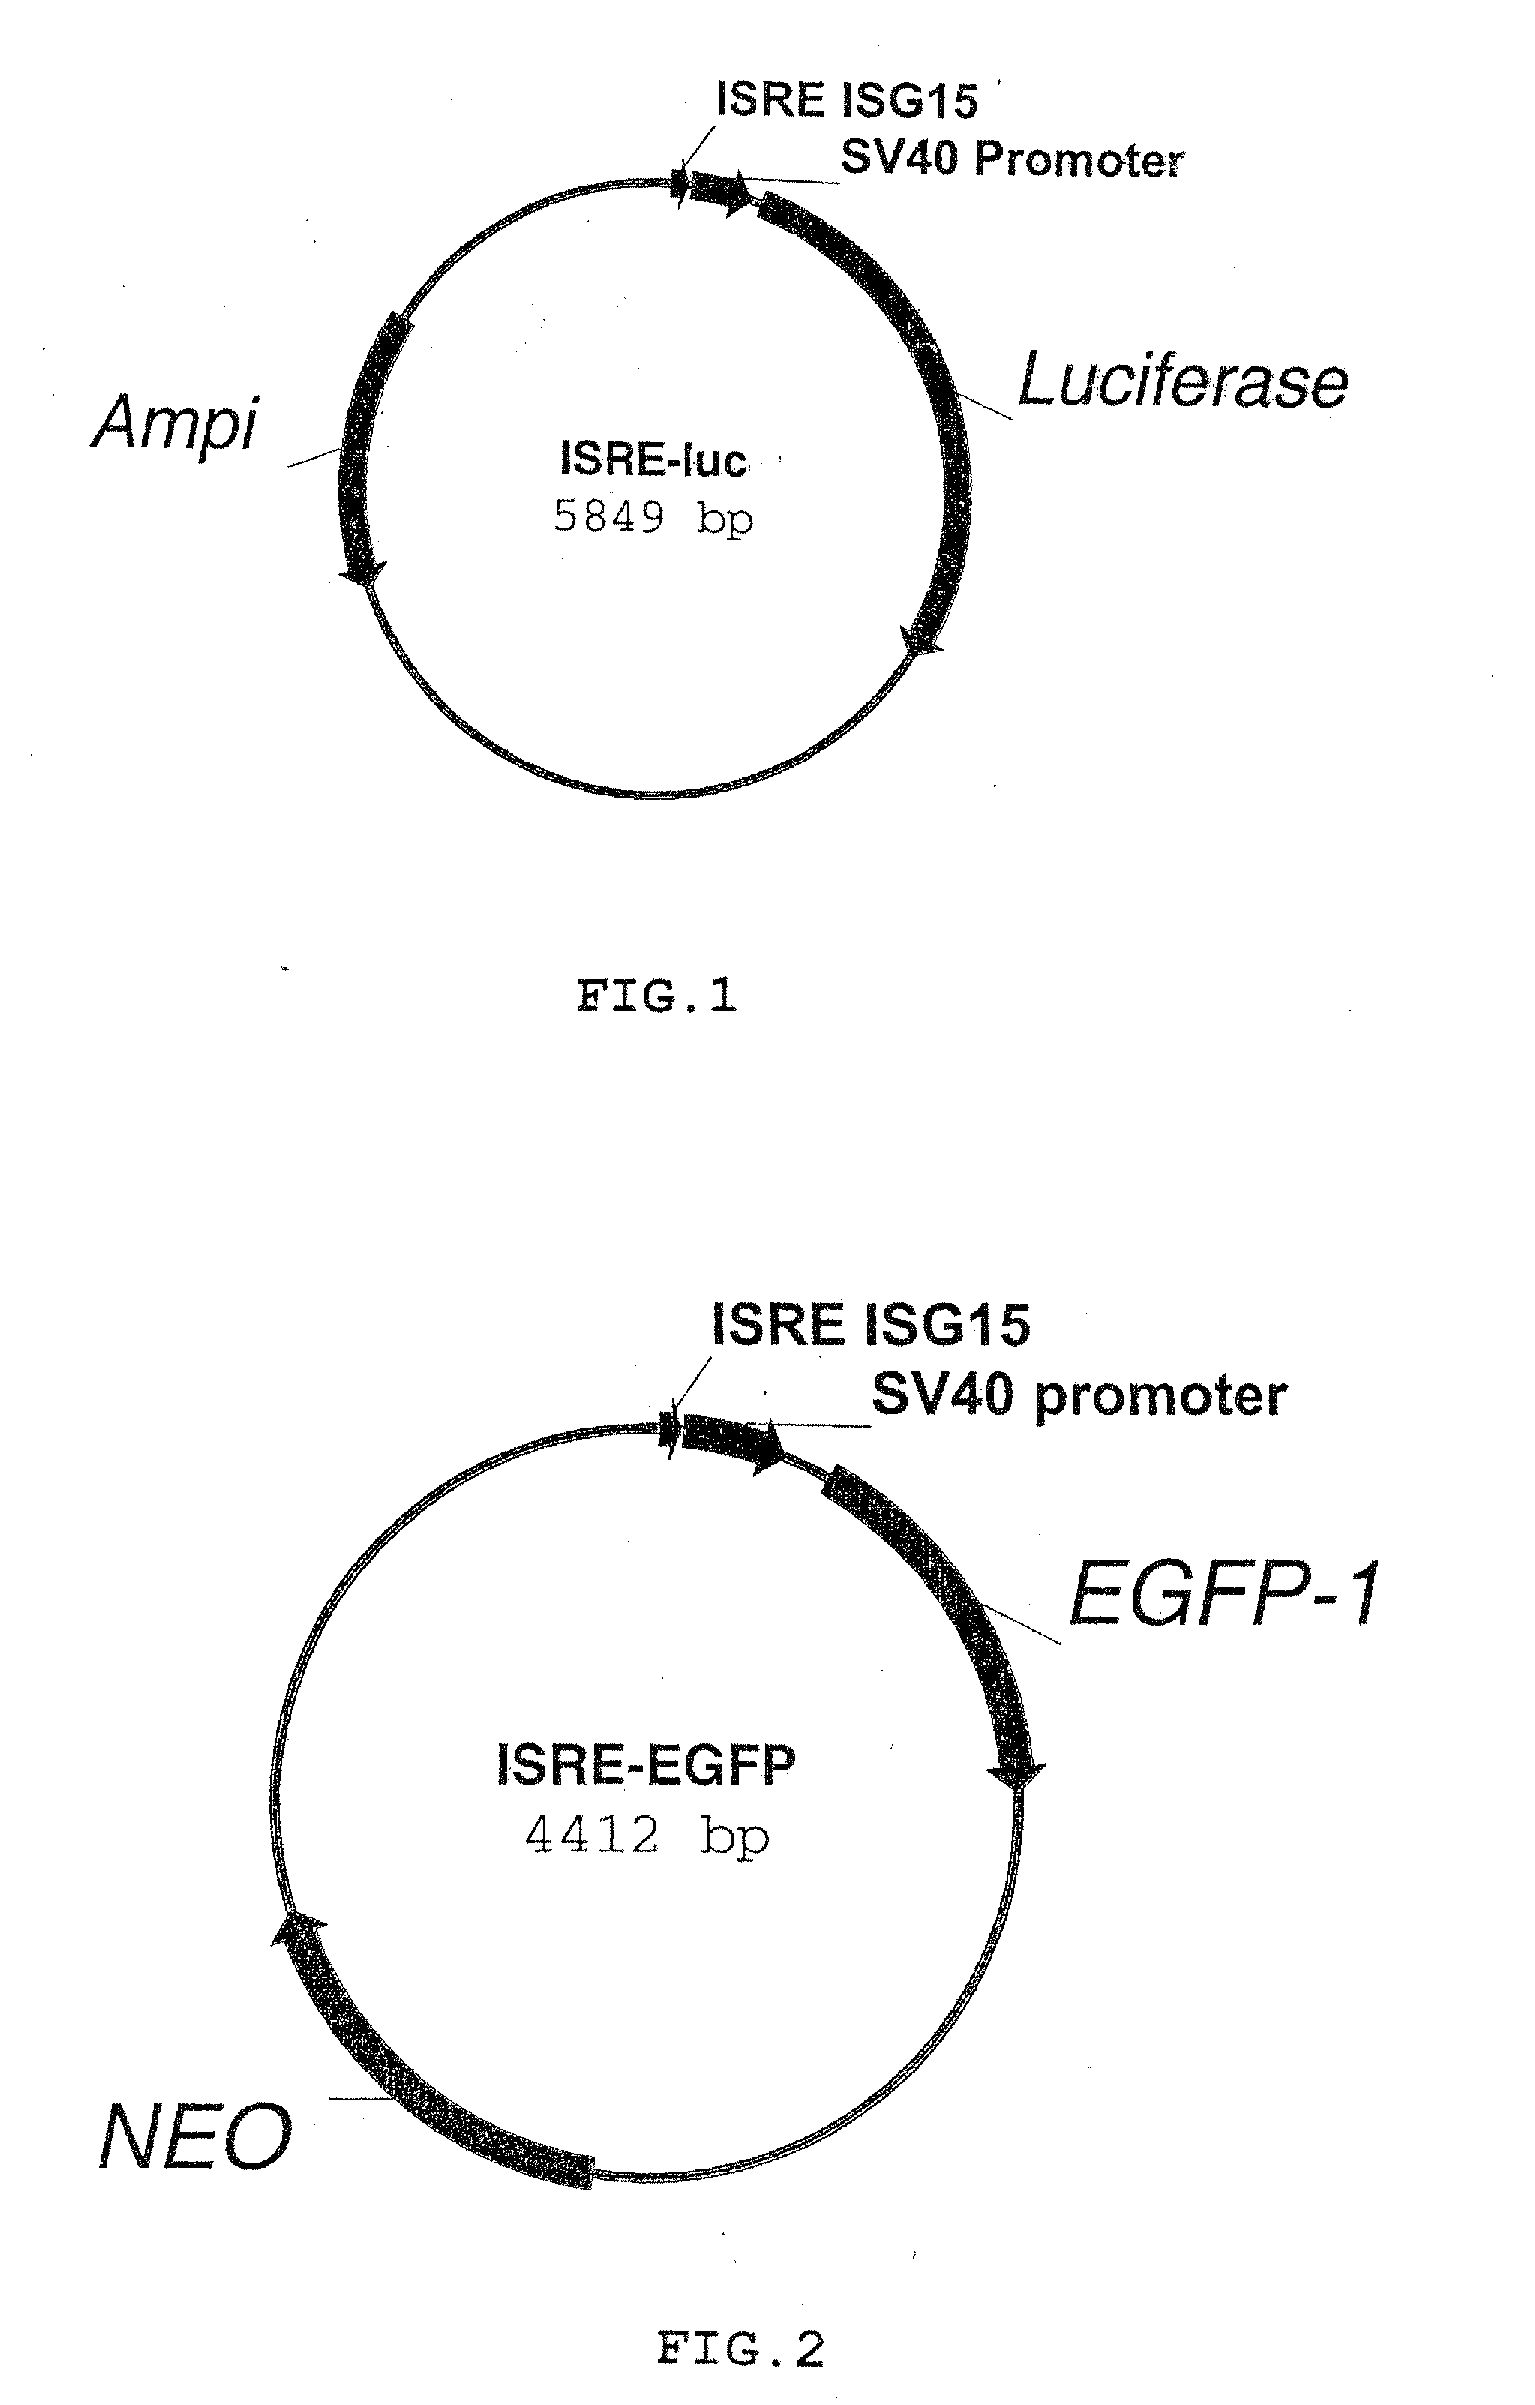 Method for conducting an assay for neutralizing antibodies